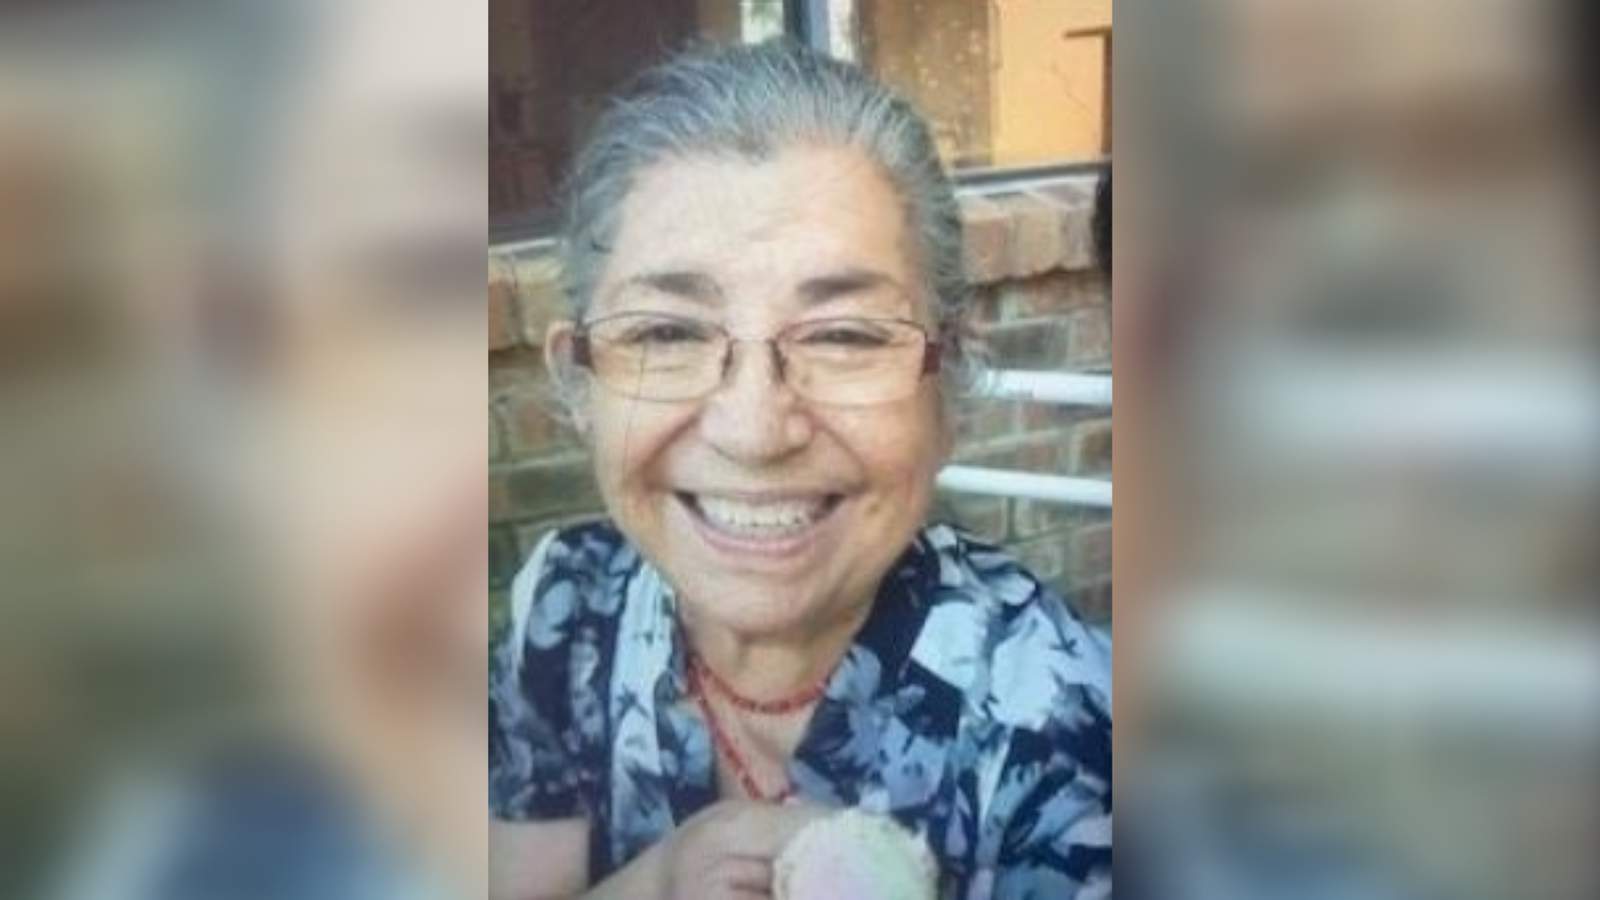 UPDATE: 76-year-old woman with Alzheimer’s found